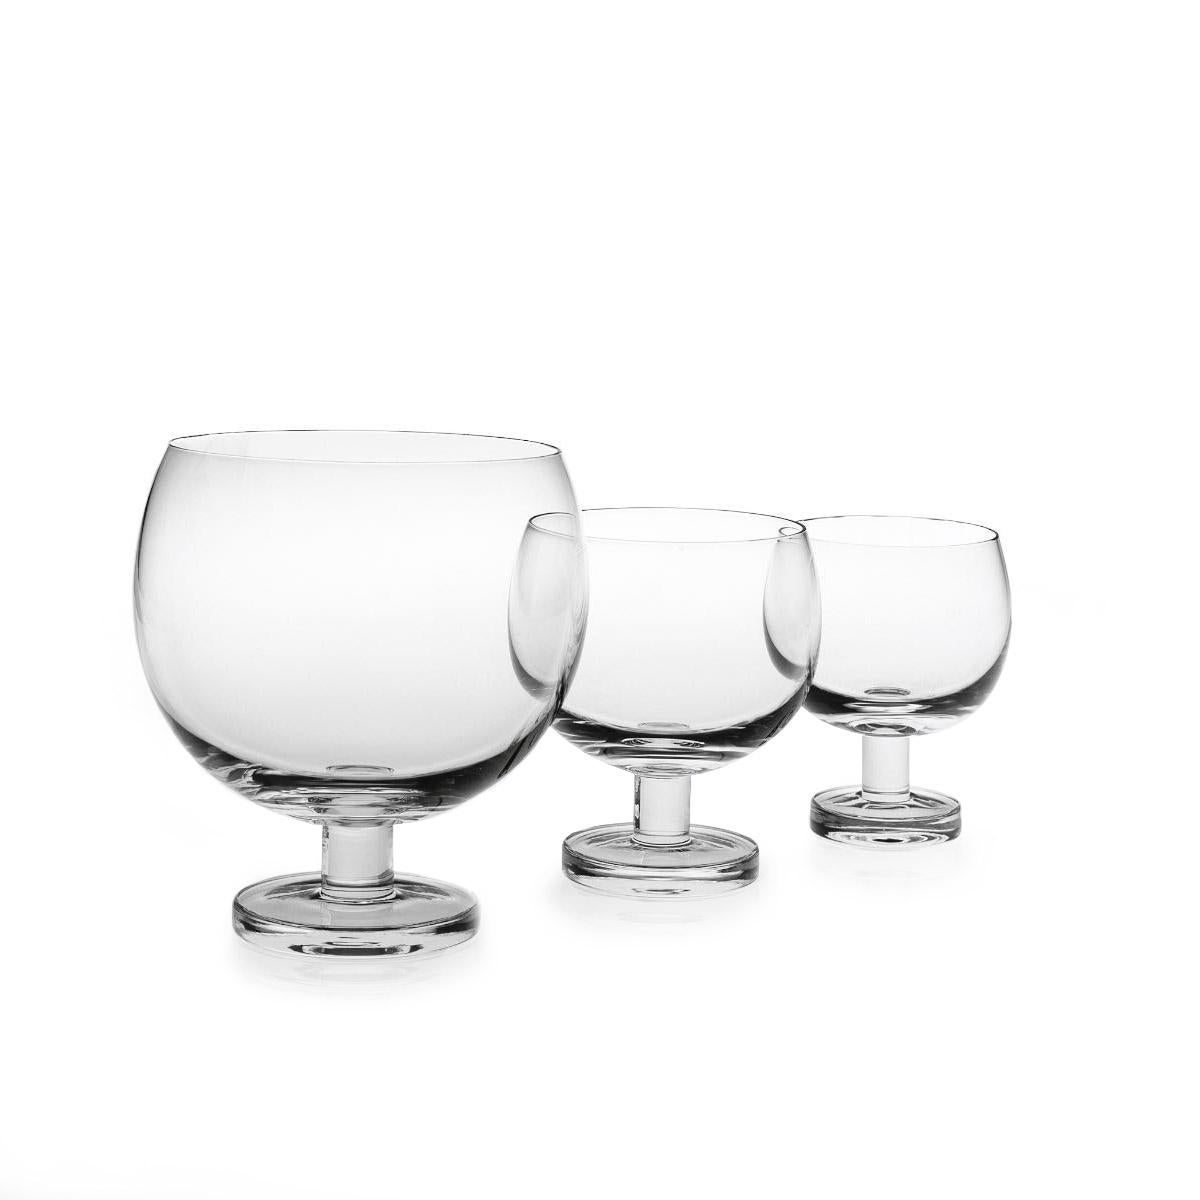 Wine glass made in blown in a mold glass. The Tulip collection is a glassware family by Aldo Cibic, who designed these pieces walking the line between classical and postmodern design. The boldly simple geometric forms are at once contemporary and